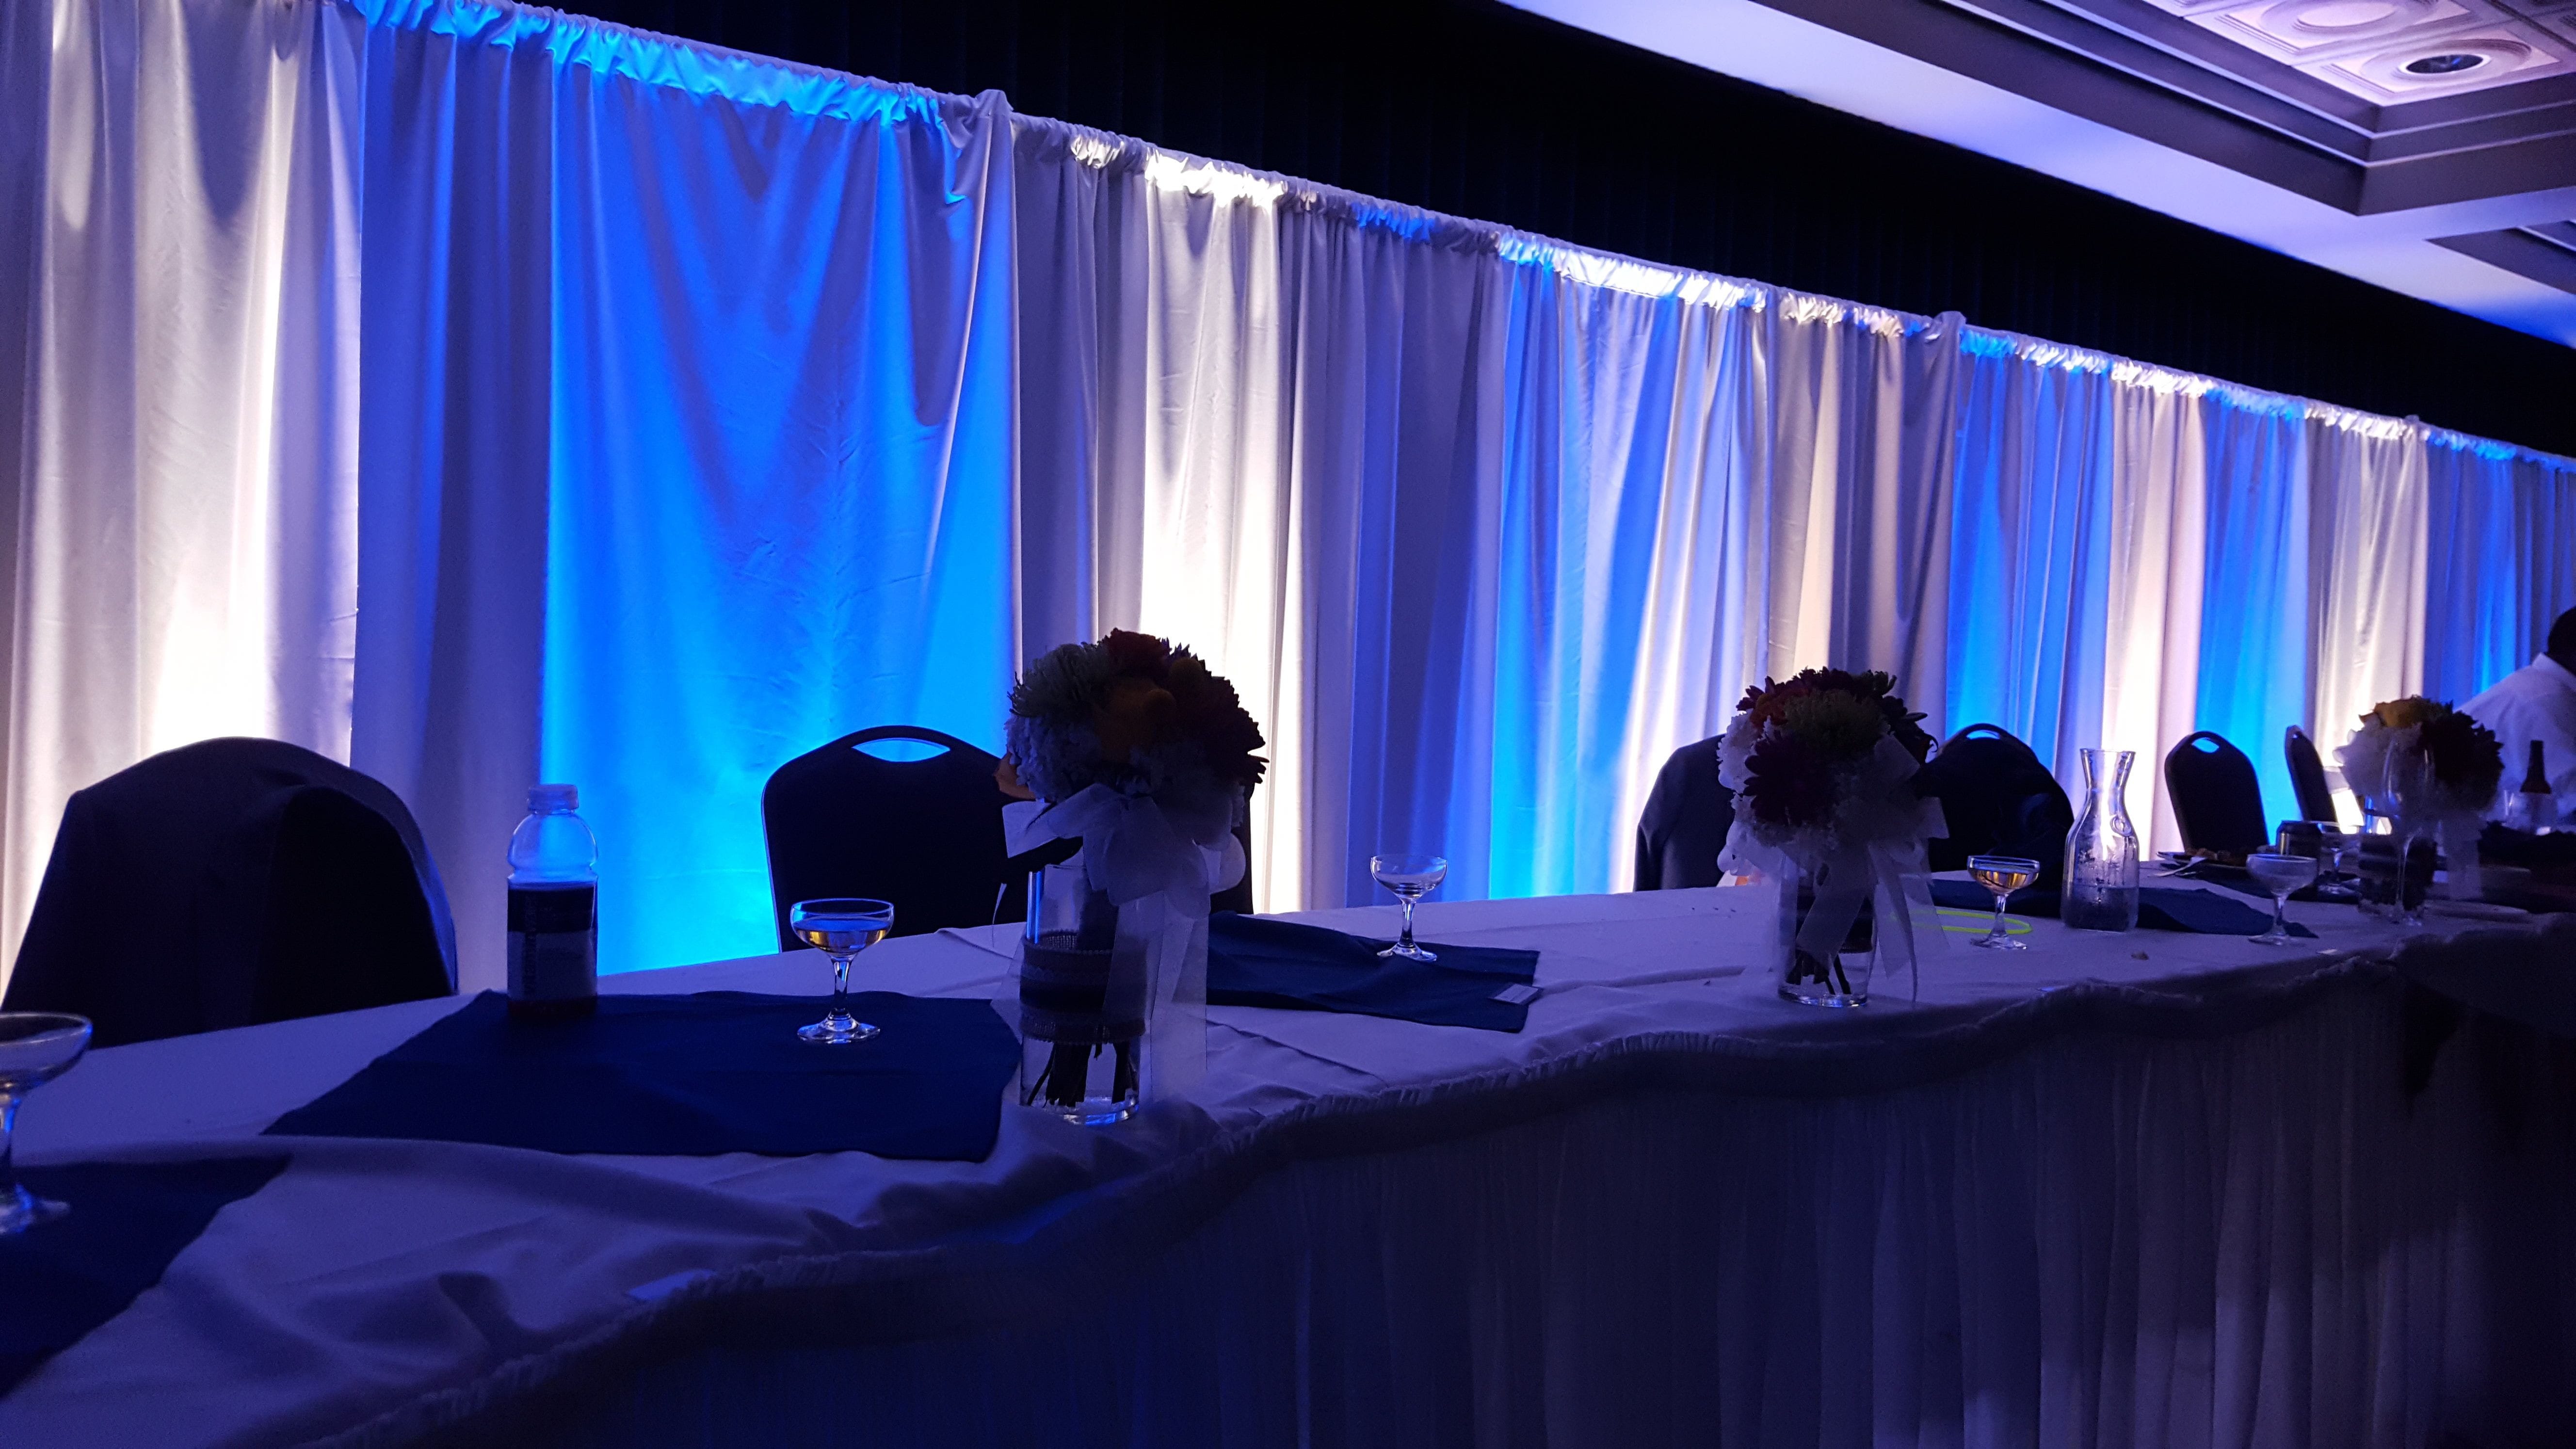 A wedding in Kirby Ballroom at UMD. Up lighting in blue and white.